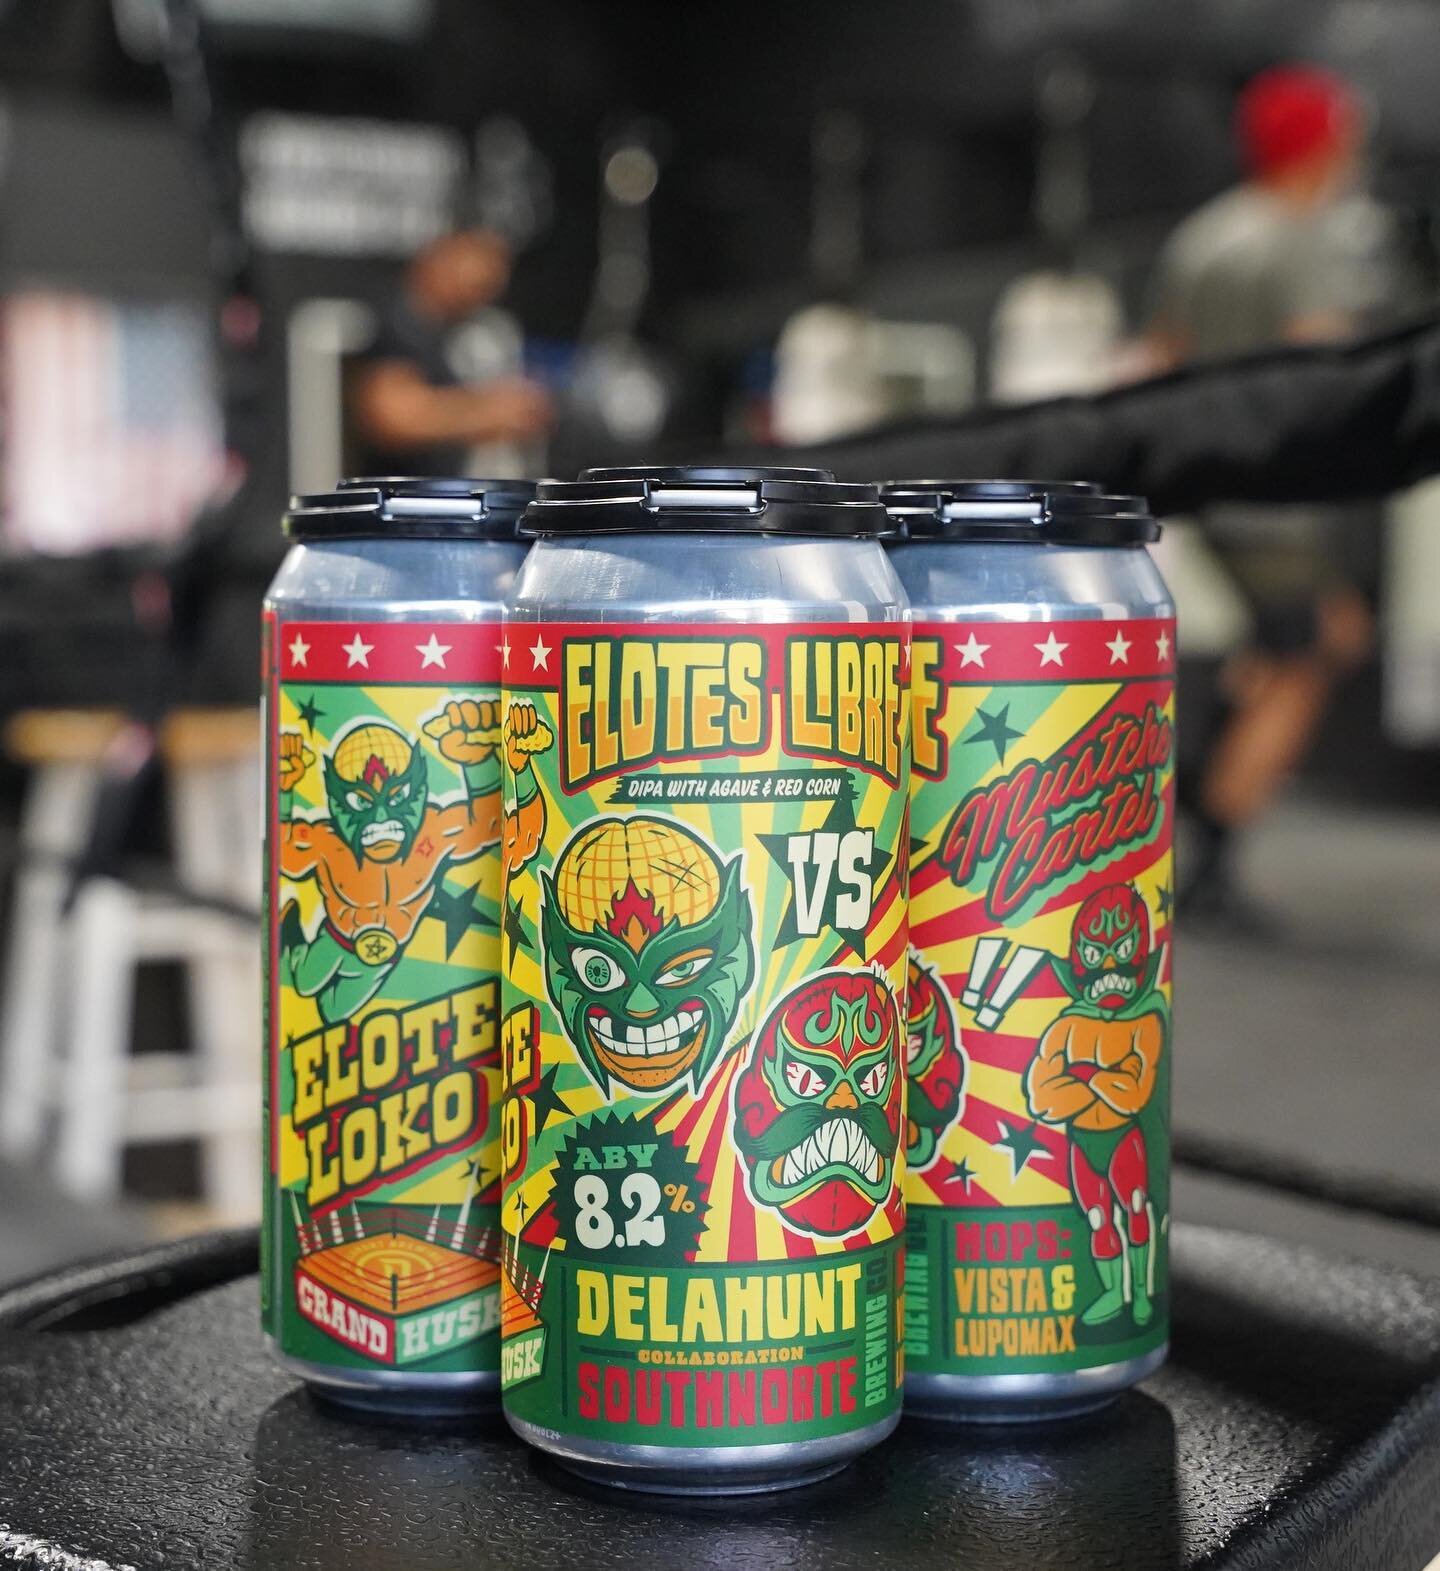 Can release number 3 for tomorrows grand opening at @delahuntbrewing_dp 
Doors open at 11:00, @smfamilia playing from 2-5 
Beer and tacos being served until 10! 
Elotes Libre
South Norte Colab
DIPA with agave and red corn
8.2%

For this Dipa we teame